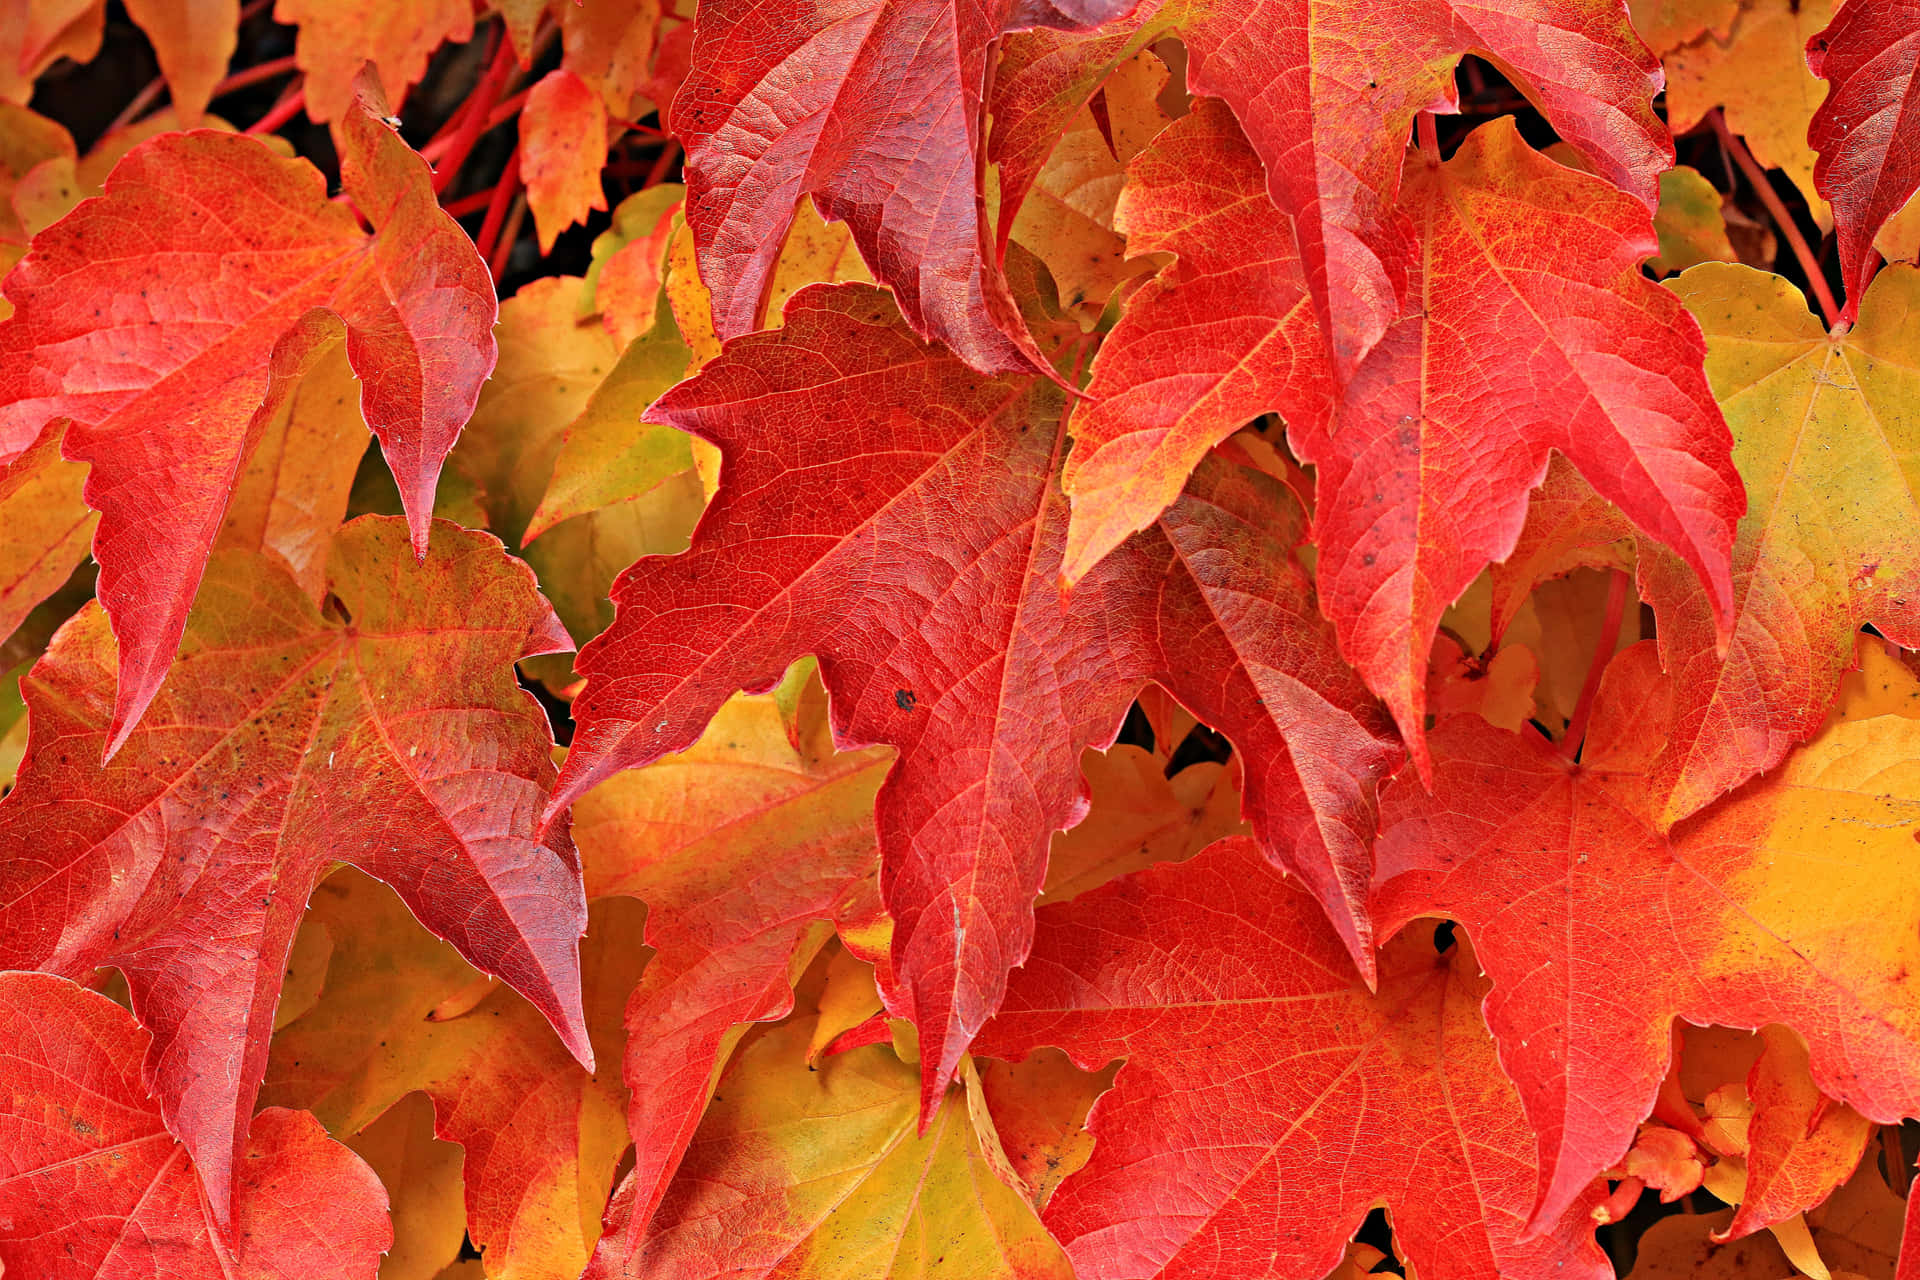 Enjoy the tranquil season of Autumn with the vibrance of autumn foliage Wallpaper